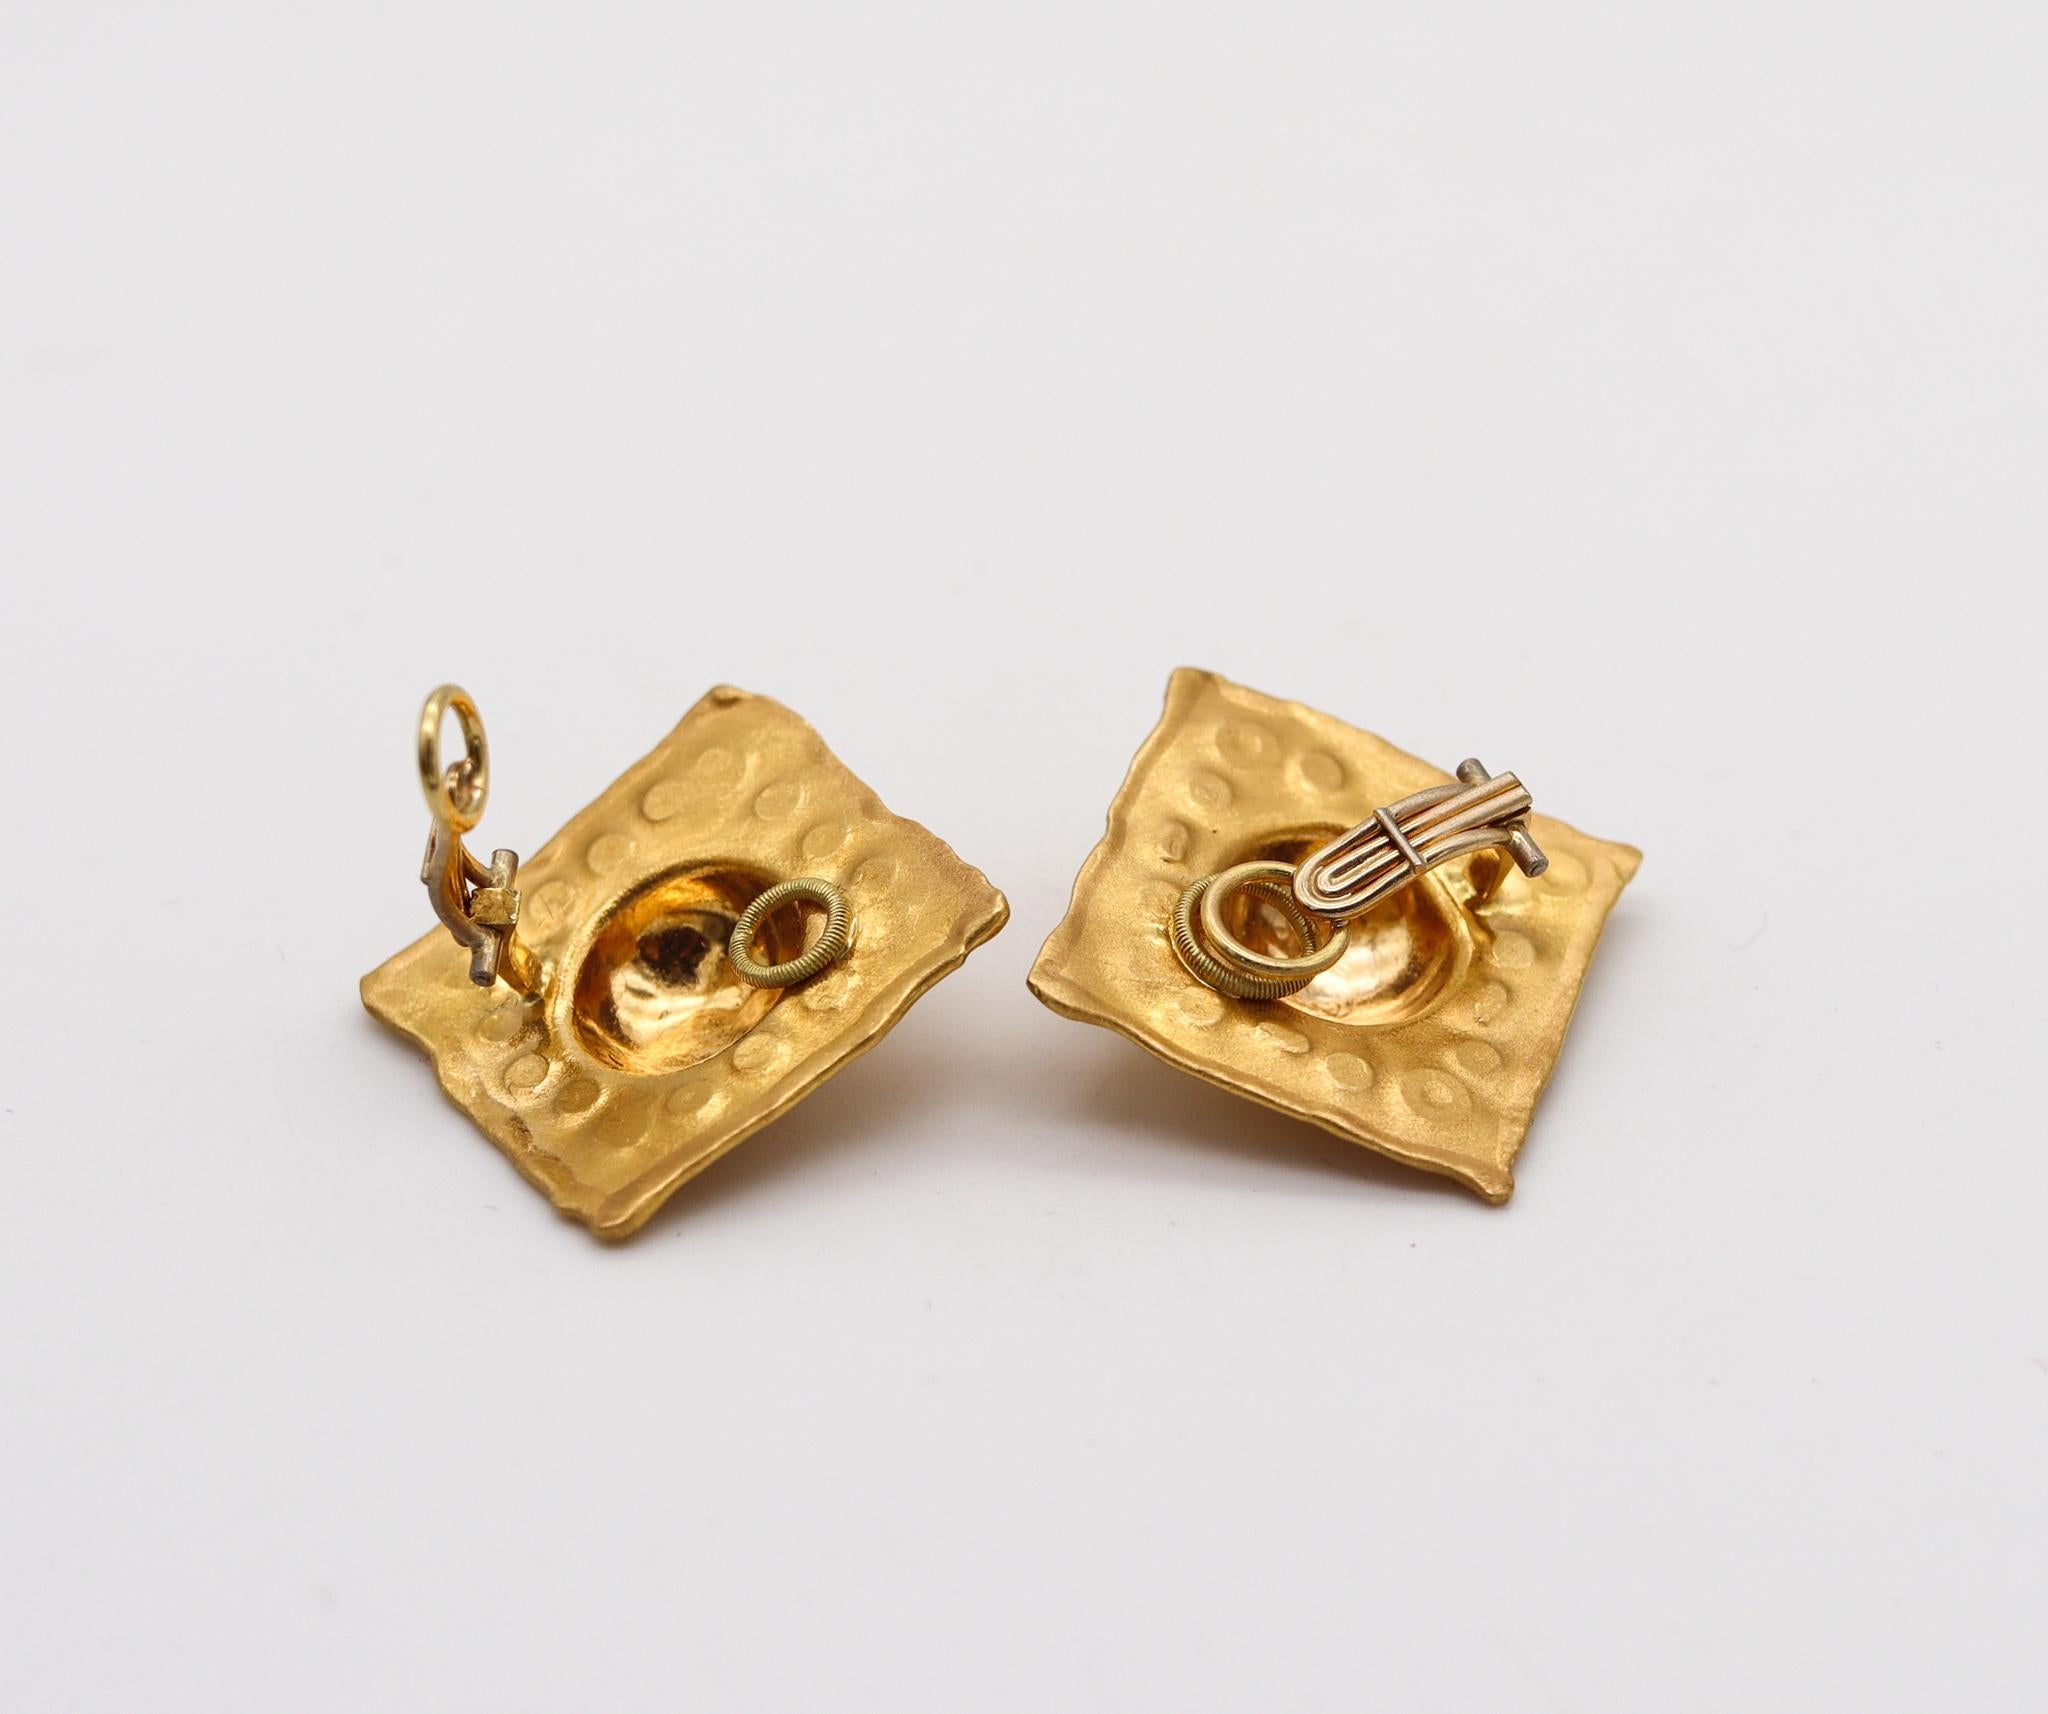 Modernist Jean Mahie Paris Artistic Vintage Squared Clips Earrings in Textured 22Kt Yellow For Sale